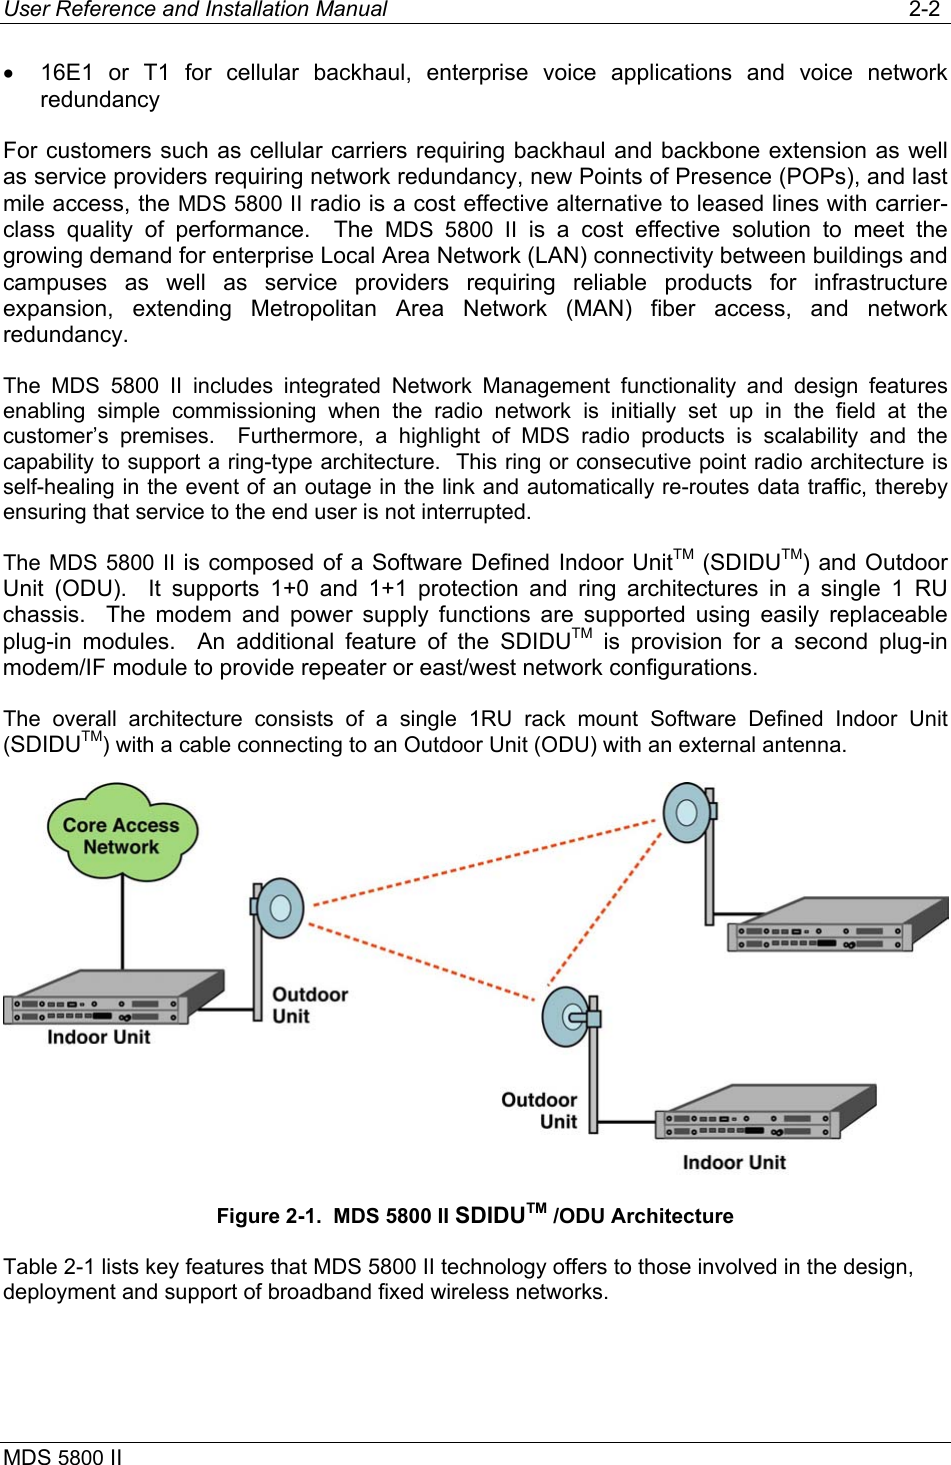 User Reference and Installation Manual   2-2 MDS 5800 II      •  16E1 or T1 for cellular backhaul, enterprise voice applications and voice network redundancy For customers such as cellular carriers requiring backhaul and backbone extension as well as service providers requiring network redundancy, new Points of Presence (POPs), and last mile access, the MDS 5800 II radio is a cost effective alternative to leased lines with carrier-class quality of performance.  The MDS 5800 II is a cost effective solution to meet the growing demand for enterprise Local Area Network (LAN) connectivity between buildings and campuses as well as service providers requiring reliable products for infrastructure expansion, extending Metropolitan Area Network (MAN) fiber access, and network redundancy. The MDS 5800 II includes integrated Network Management functionality and design features enabling simple commissioning when the radio network is initially set up in the field at the customer’s premises.  Furthermore, a highlight of MDS radio products is scalability and the capability to support a ring-type architecture.  This ring or consecutive point radio architecture is self-healing in the event of an outage in the link and automatically re-routes data traffic, thereby ensuring that service to the end user is not interrupted. The MDS 5800 II is composed of a Software Defined Indoor UnitTM (SDIDUTM) and Outdoor Unit (ODU).  It supports 1+0 and 1+1 protection and ring architectures in a single 1 RU chassis.  The modem and power supply functions are supported using easily replaceable plug-in modules.  An additional feature of the SDIDUTM is provision for a second plug-in modem/IF module to provide repeater or east/west network configurations. The overall architecture consists of a single 1RU rack mount Software Defined Indoor Unit (SDIDUTM) with a cable connecting to an Outdoor Unit (ODU) with an external antenna.  Figure 2-1.  MDS 5800 II SDIDUTM /ODU Architecture Table 2-1 lists key features that MDS 5800 II technology offers to those involved in the design, deployment and support of broadband fixed wireless networks. 